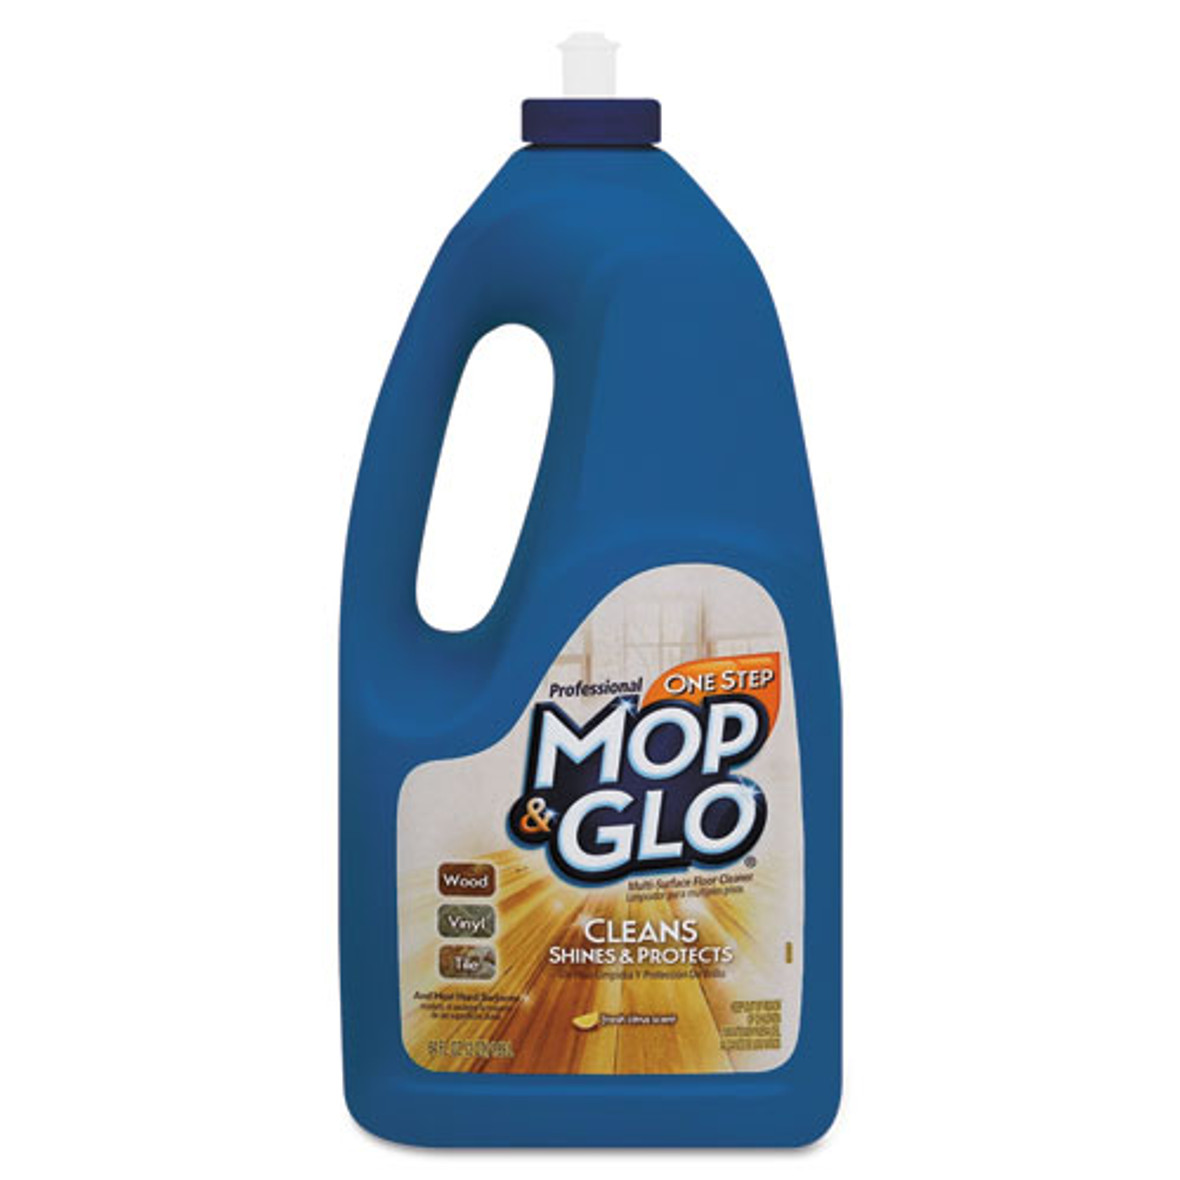 Mop and Glo Triple Action Floor Shine Cleaner, Fresh Citrus Scent